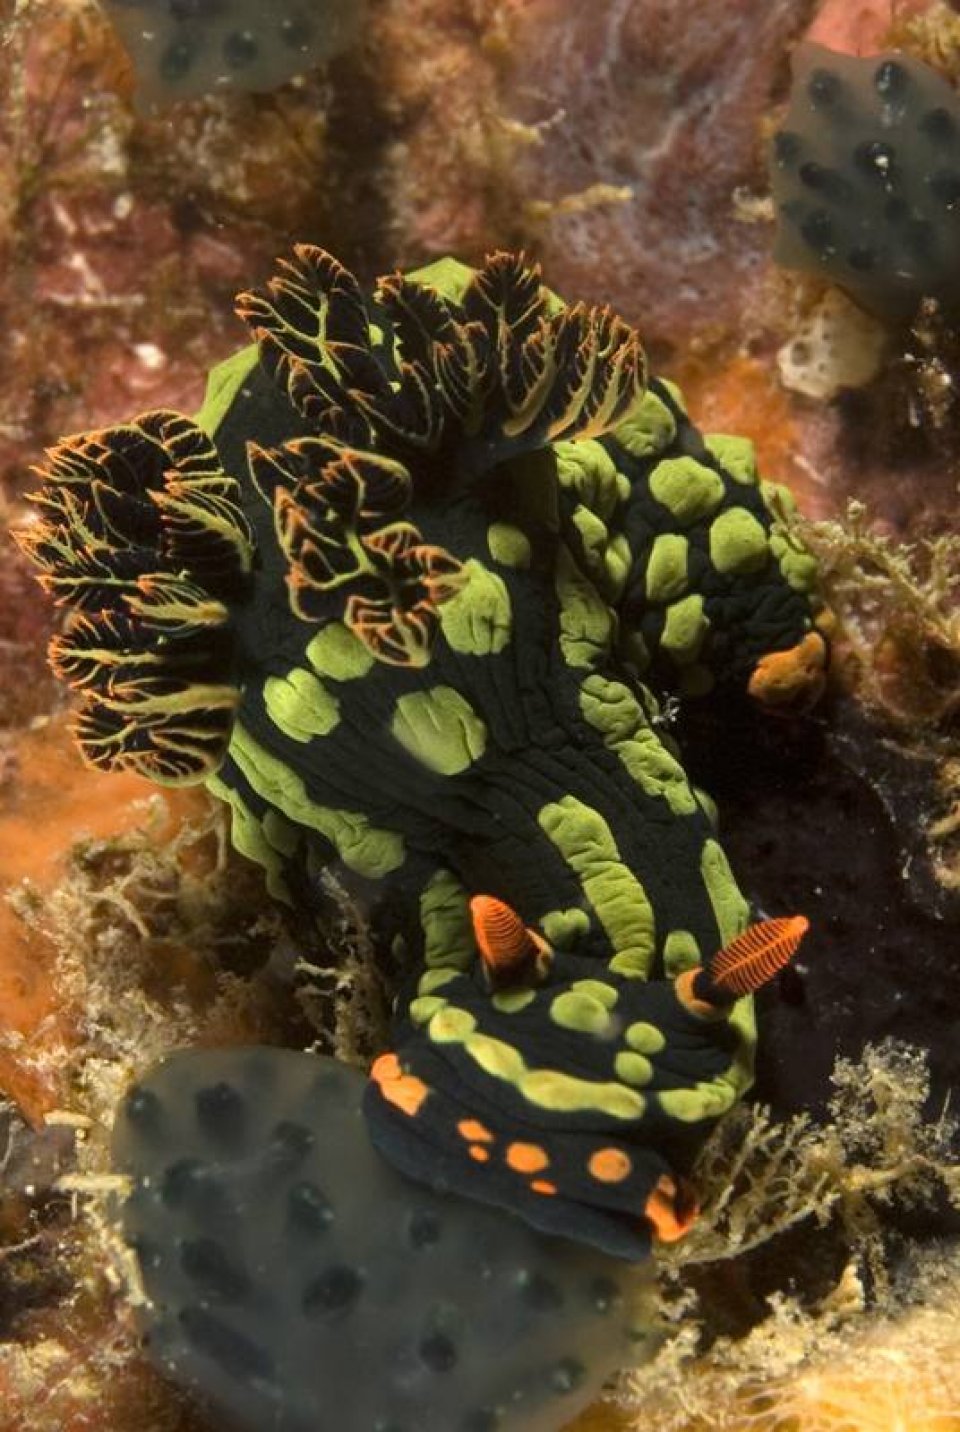 Tioman is heaven for Nudibranch lovers